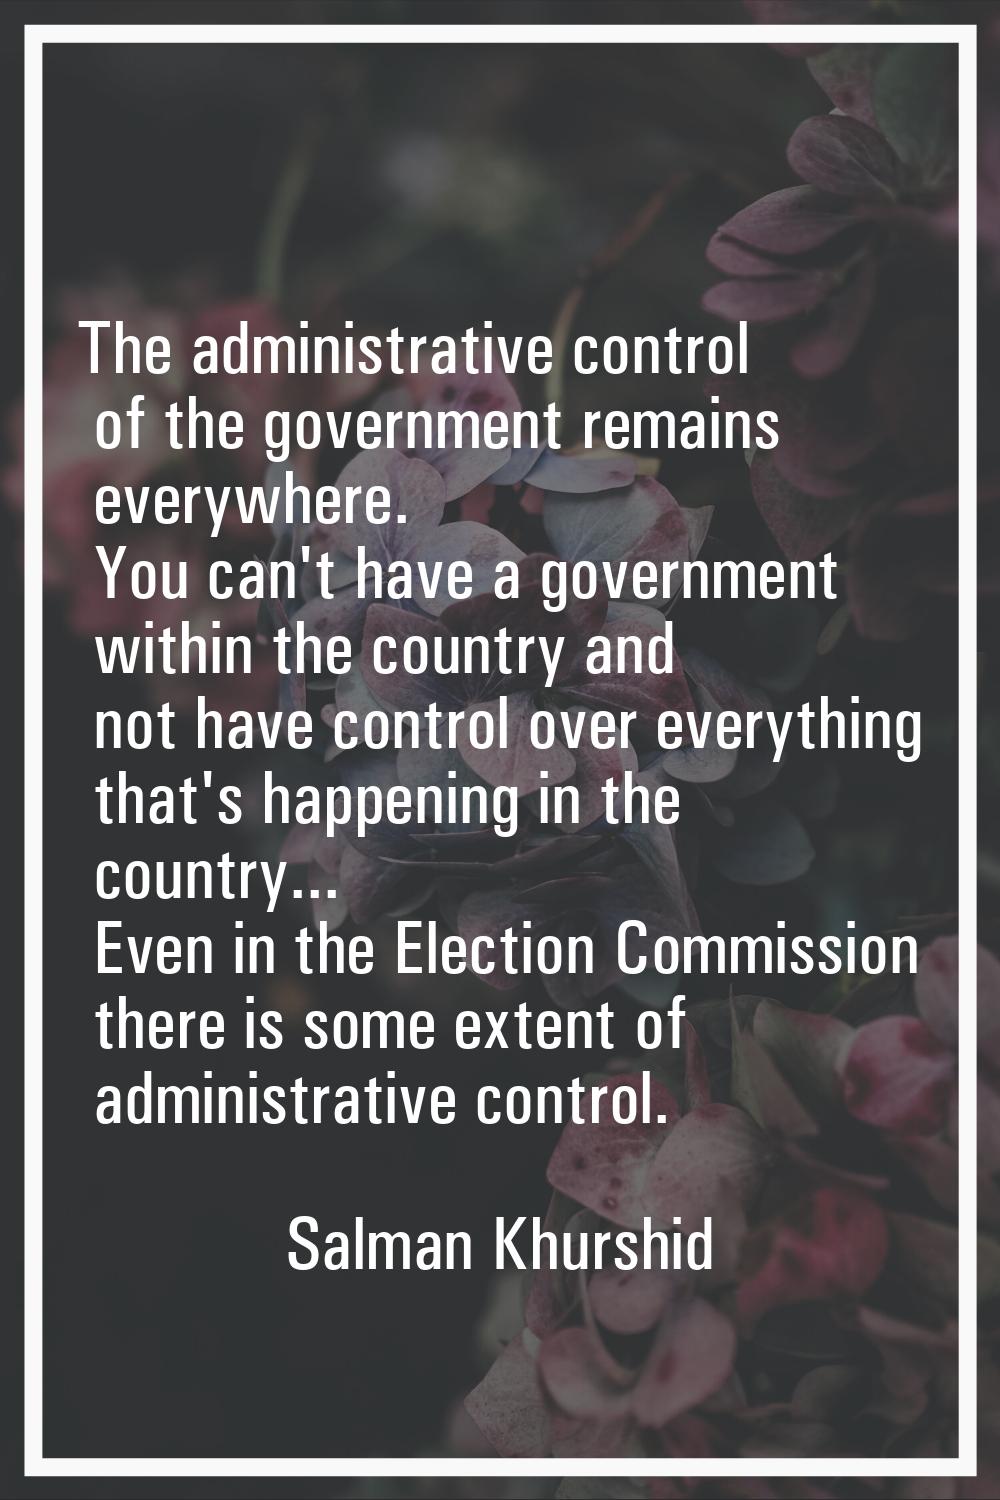 The administrative control of the government remains everywhere. You can't have a government within